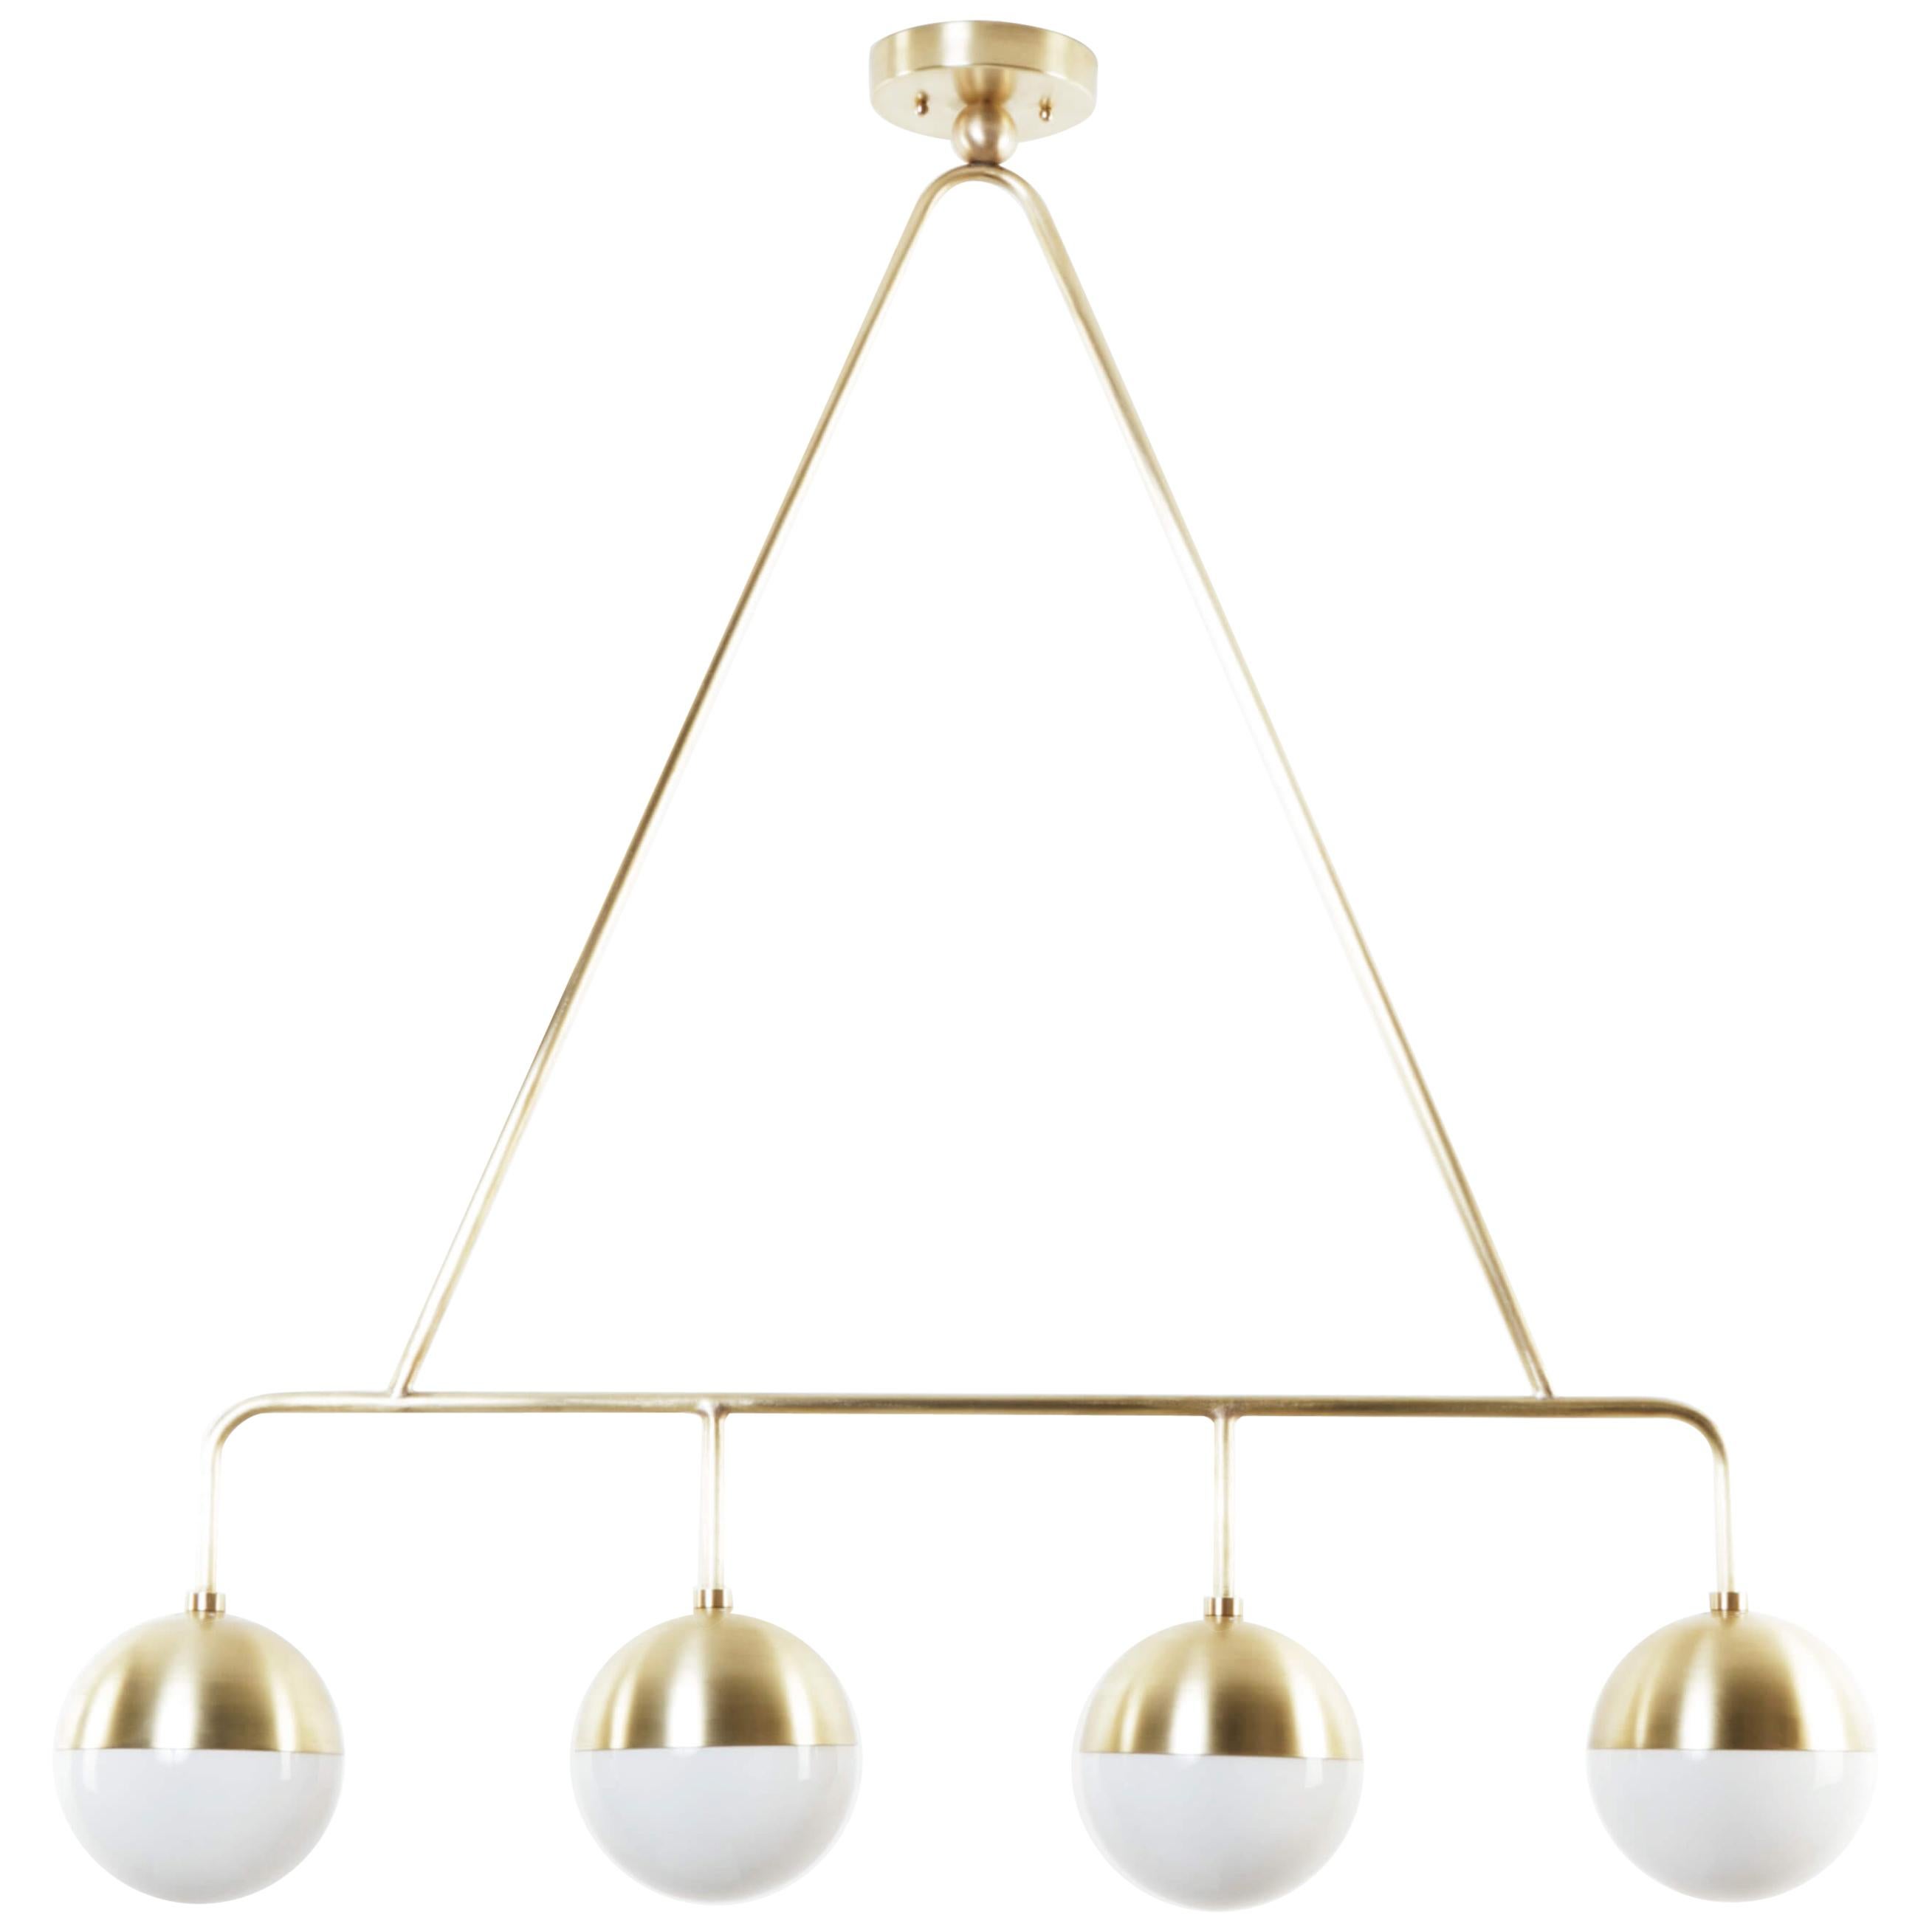 Balise Pendant Light in Brass with 4 Opal Glass Globes